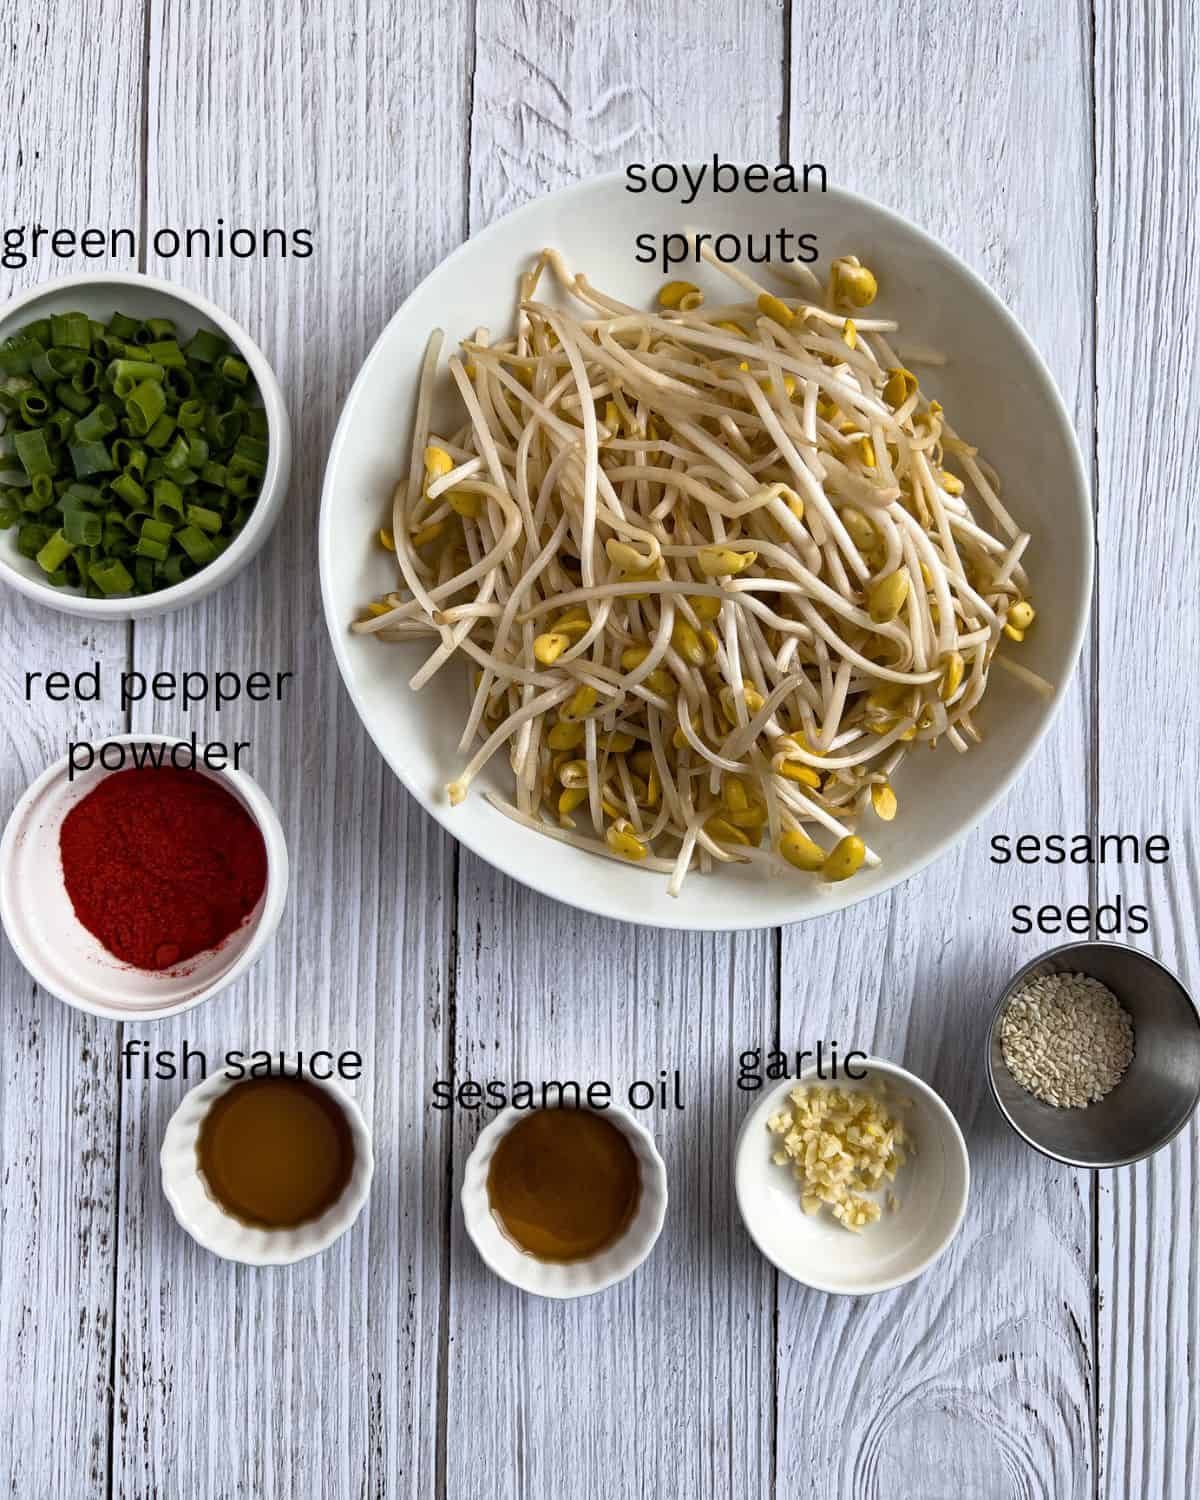 Ingredients for soybean sprouts korean side dish.